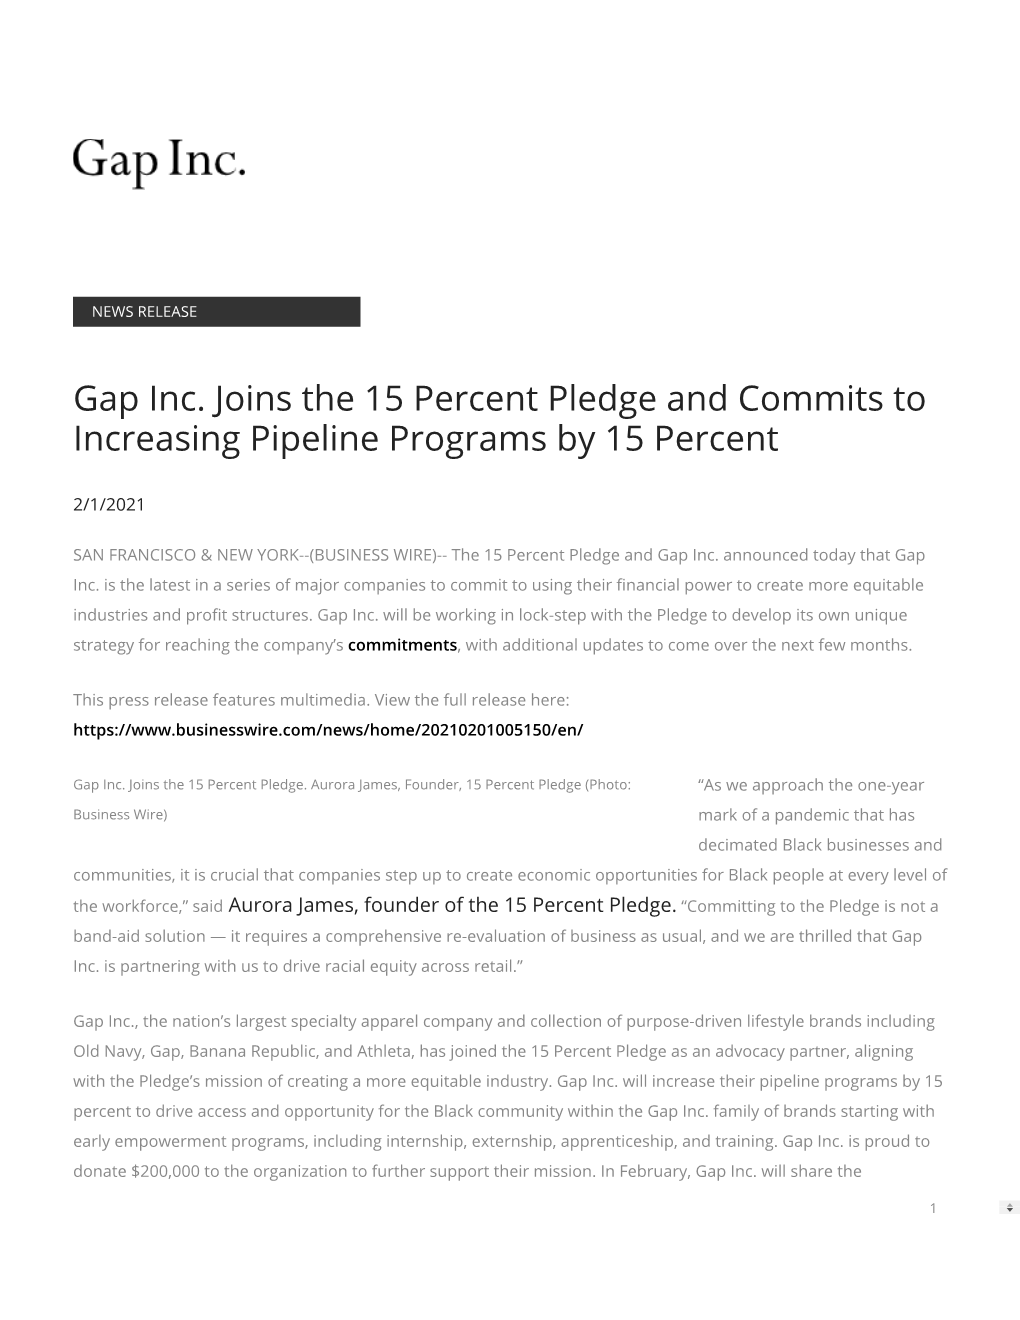 Gap Inc. Joins the 15 Percent Pledge and Commits to Increasing Pipeline Programs by 15 Percent